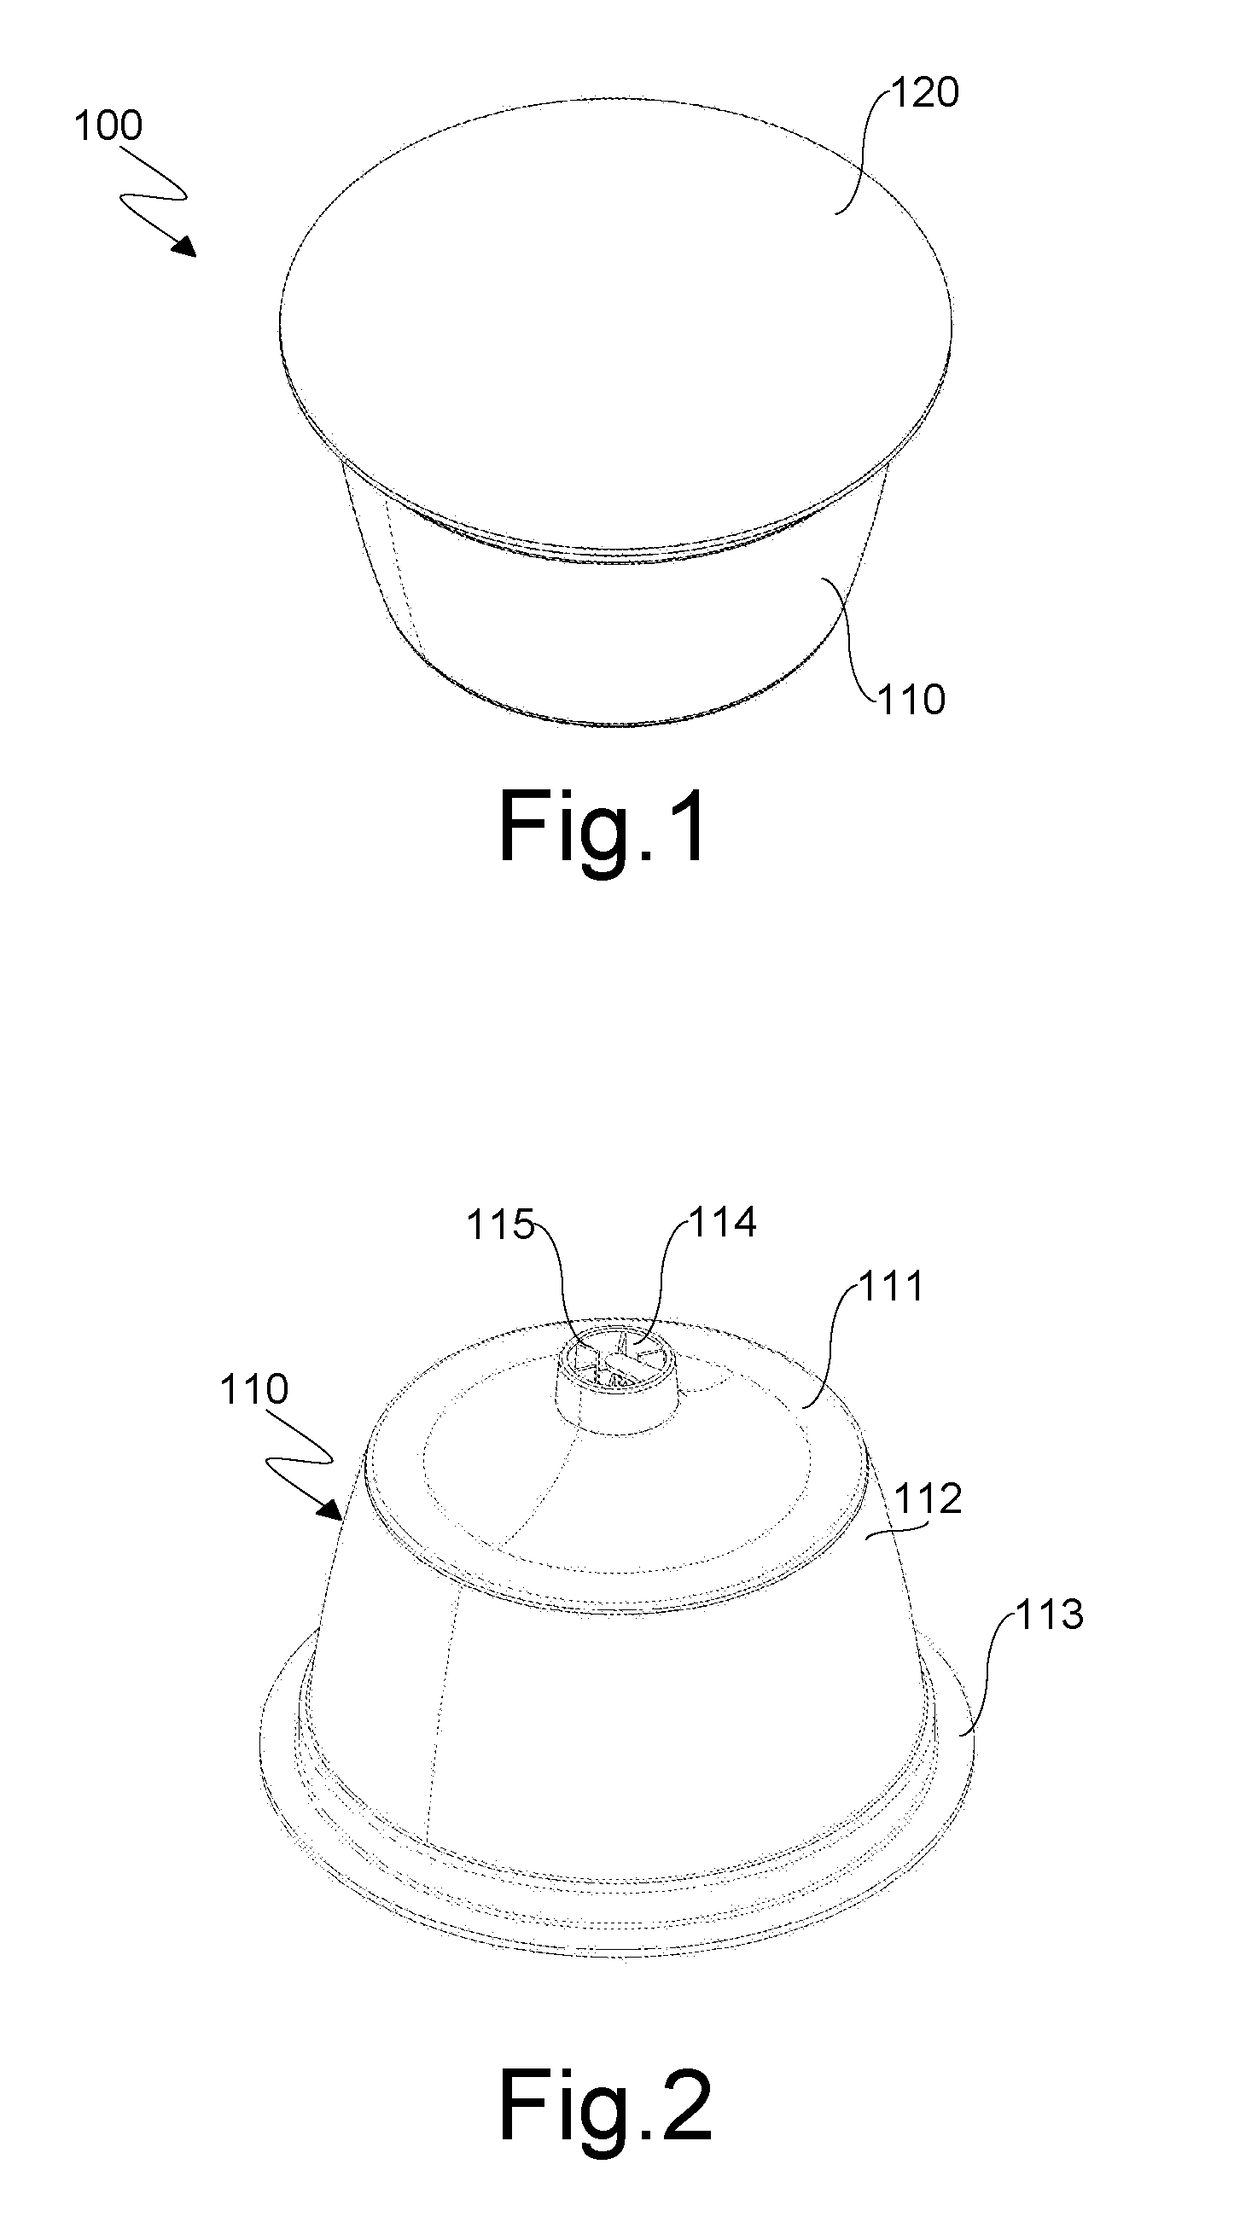 Single-use capsule for machines for the dispensing of infused beverages